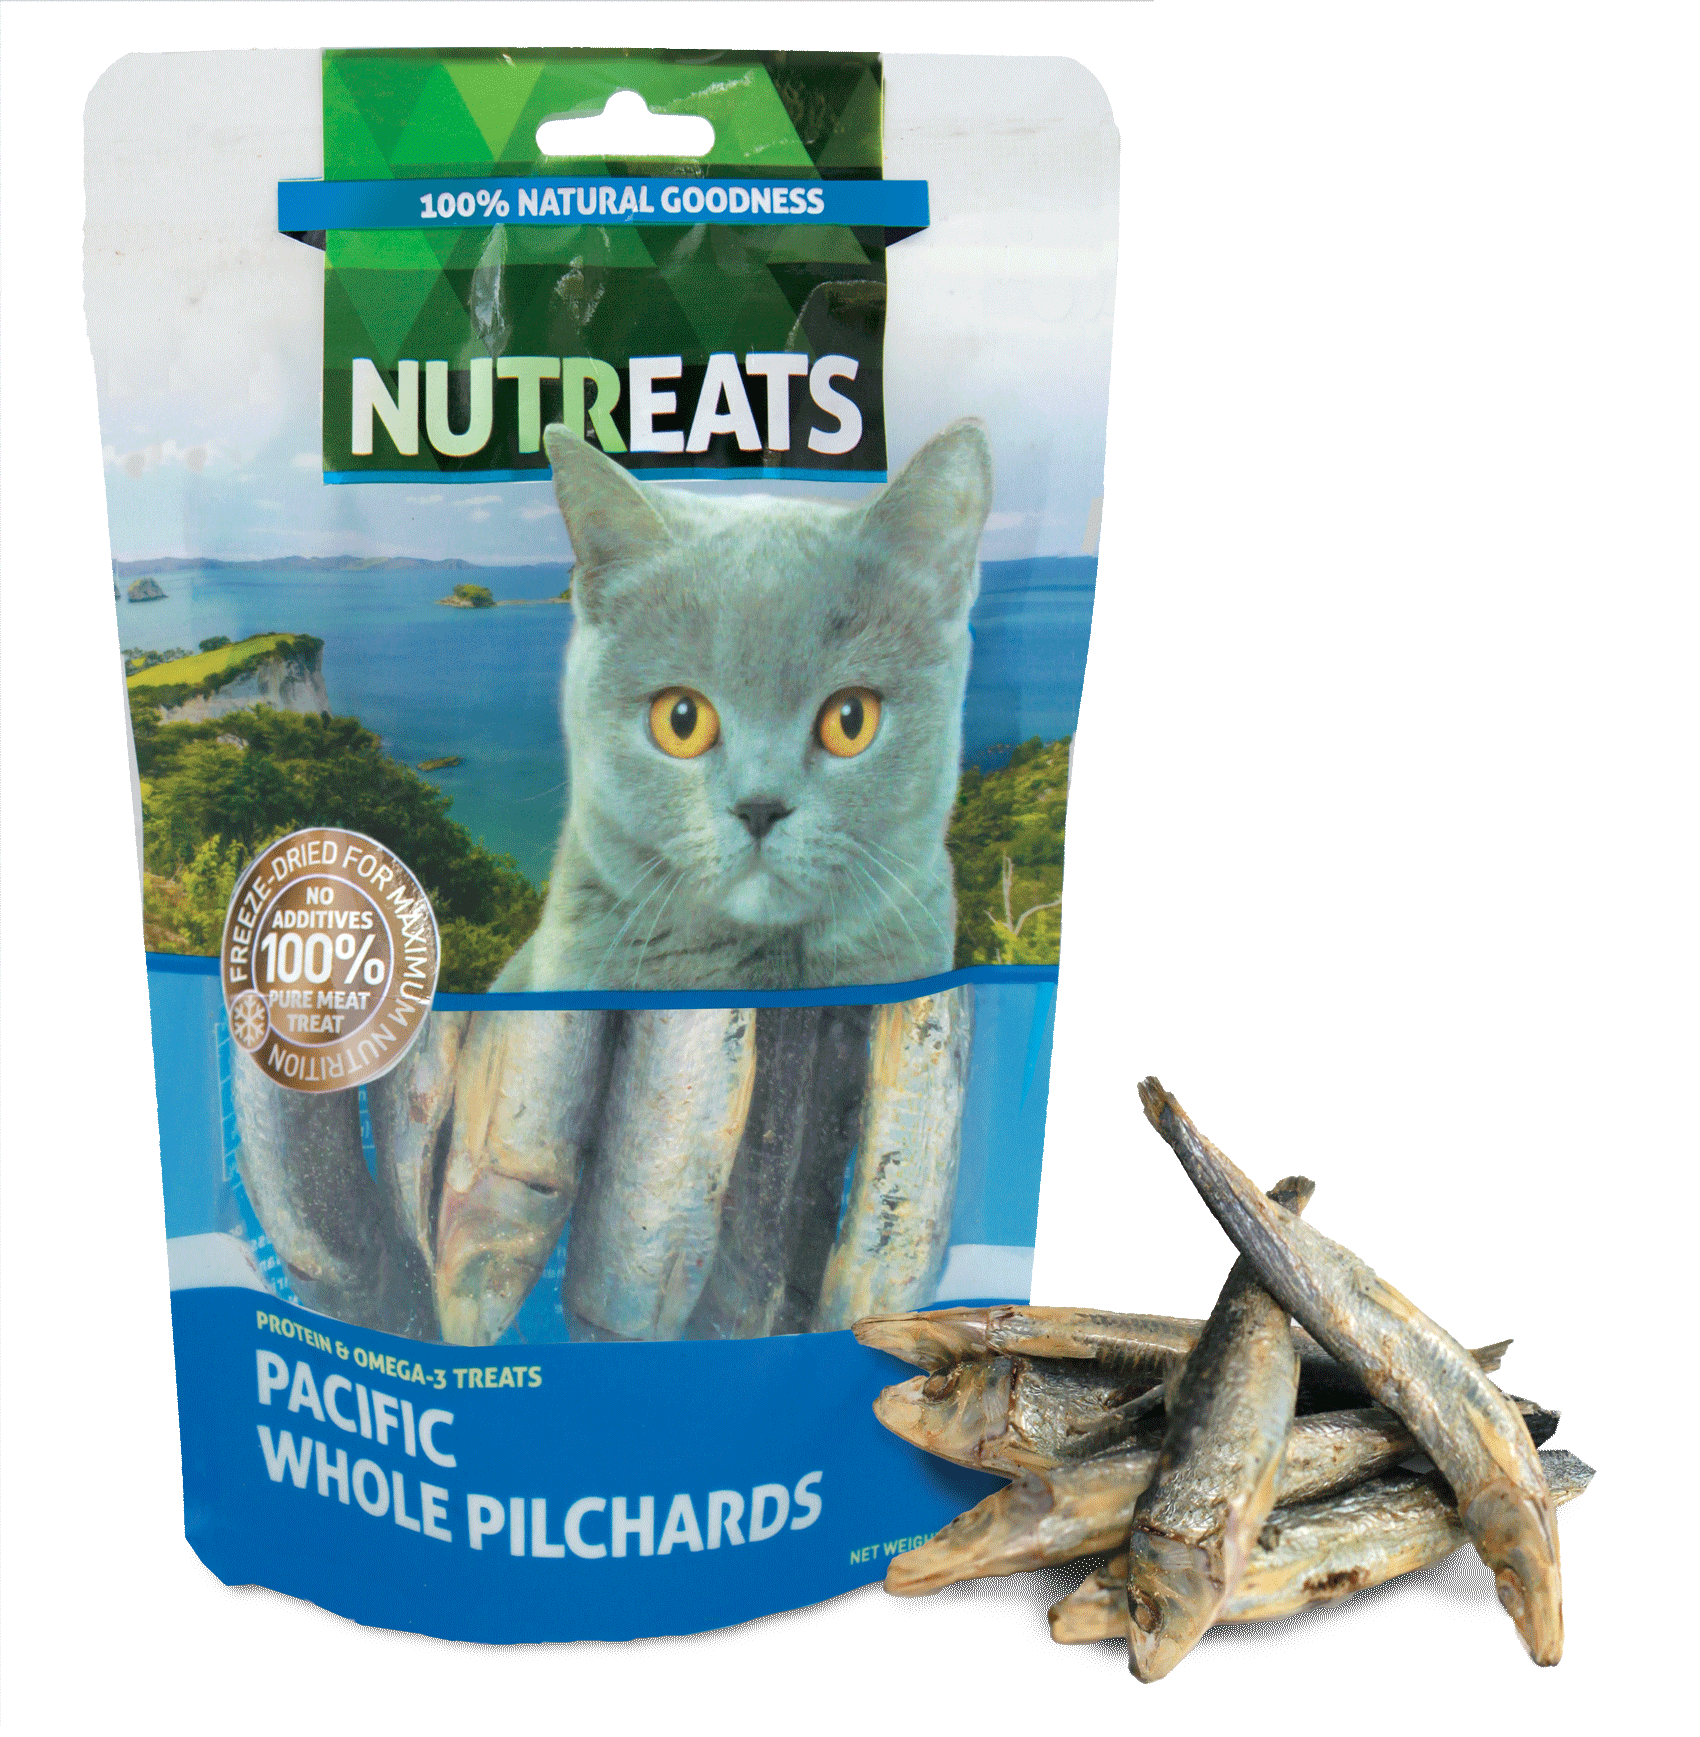 Nutreats Freeze Dried Pilchards for Cats